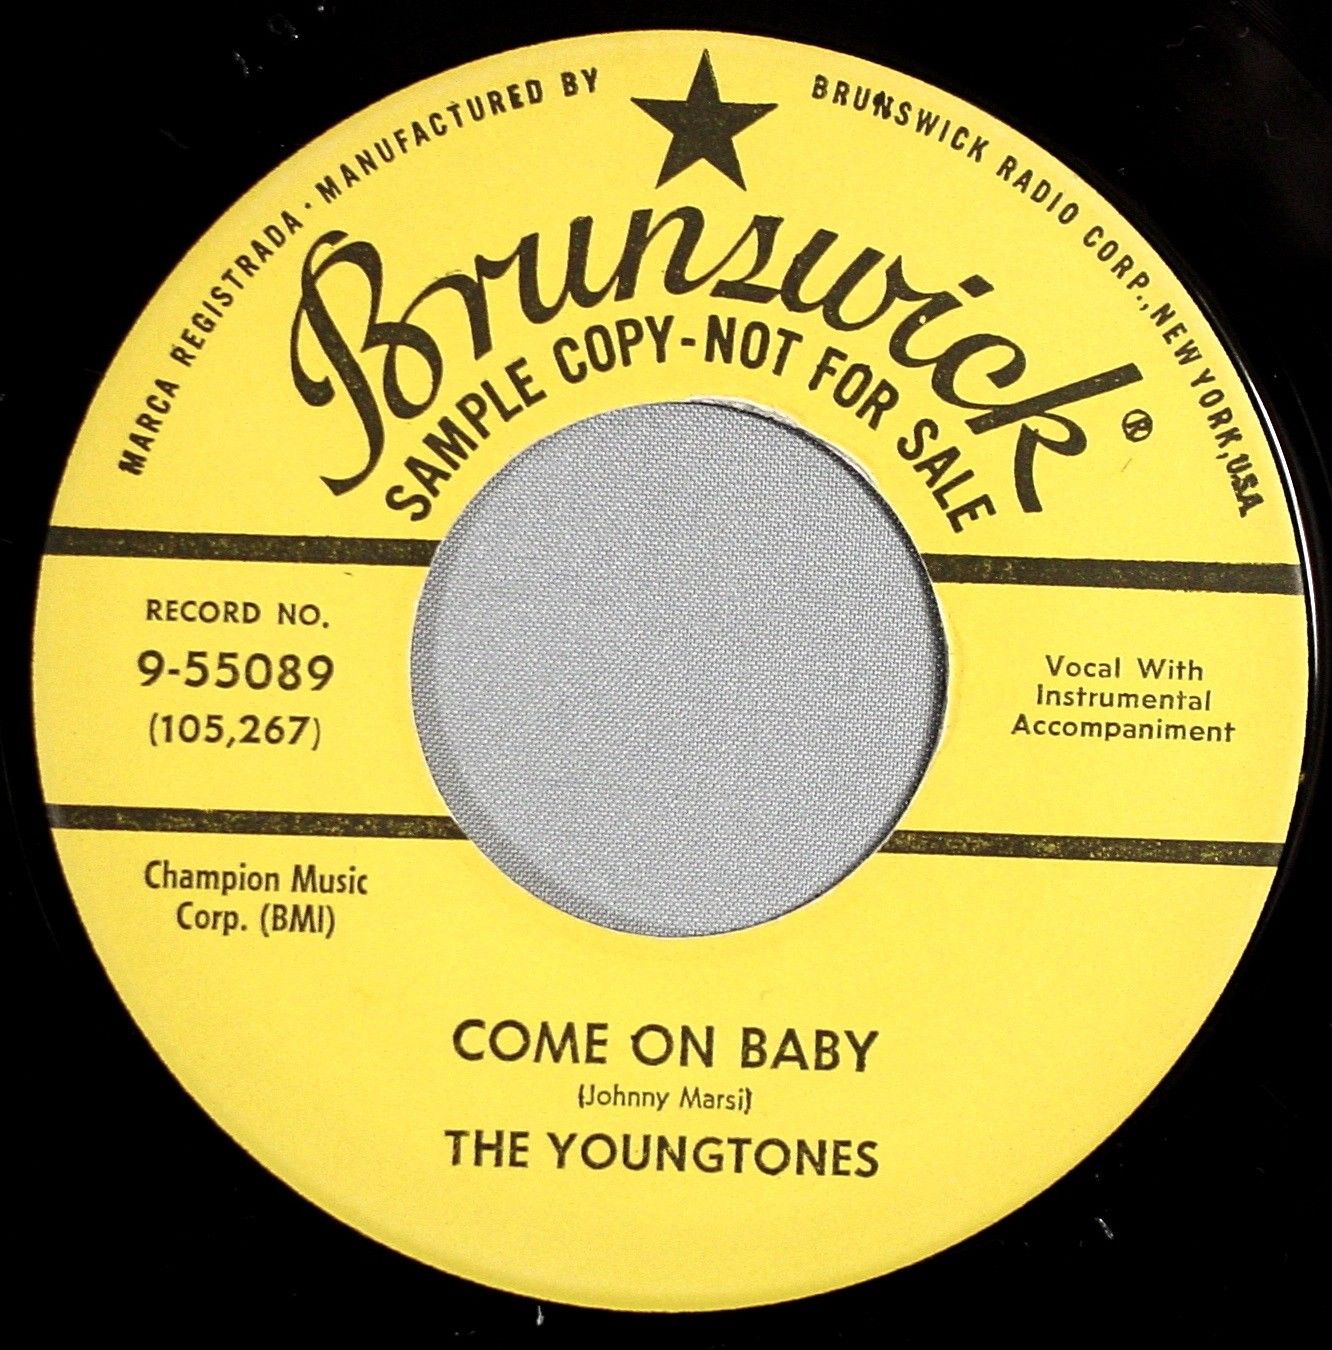 popsike.com - HEAR IT 50's Doo-Wop Promo 45 rpm record The Youngtones ...